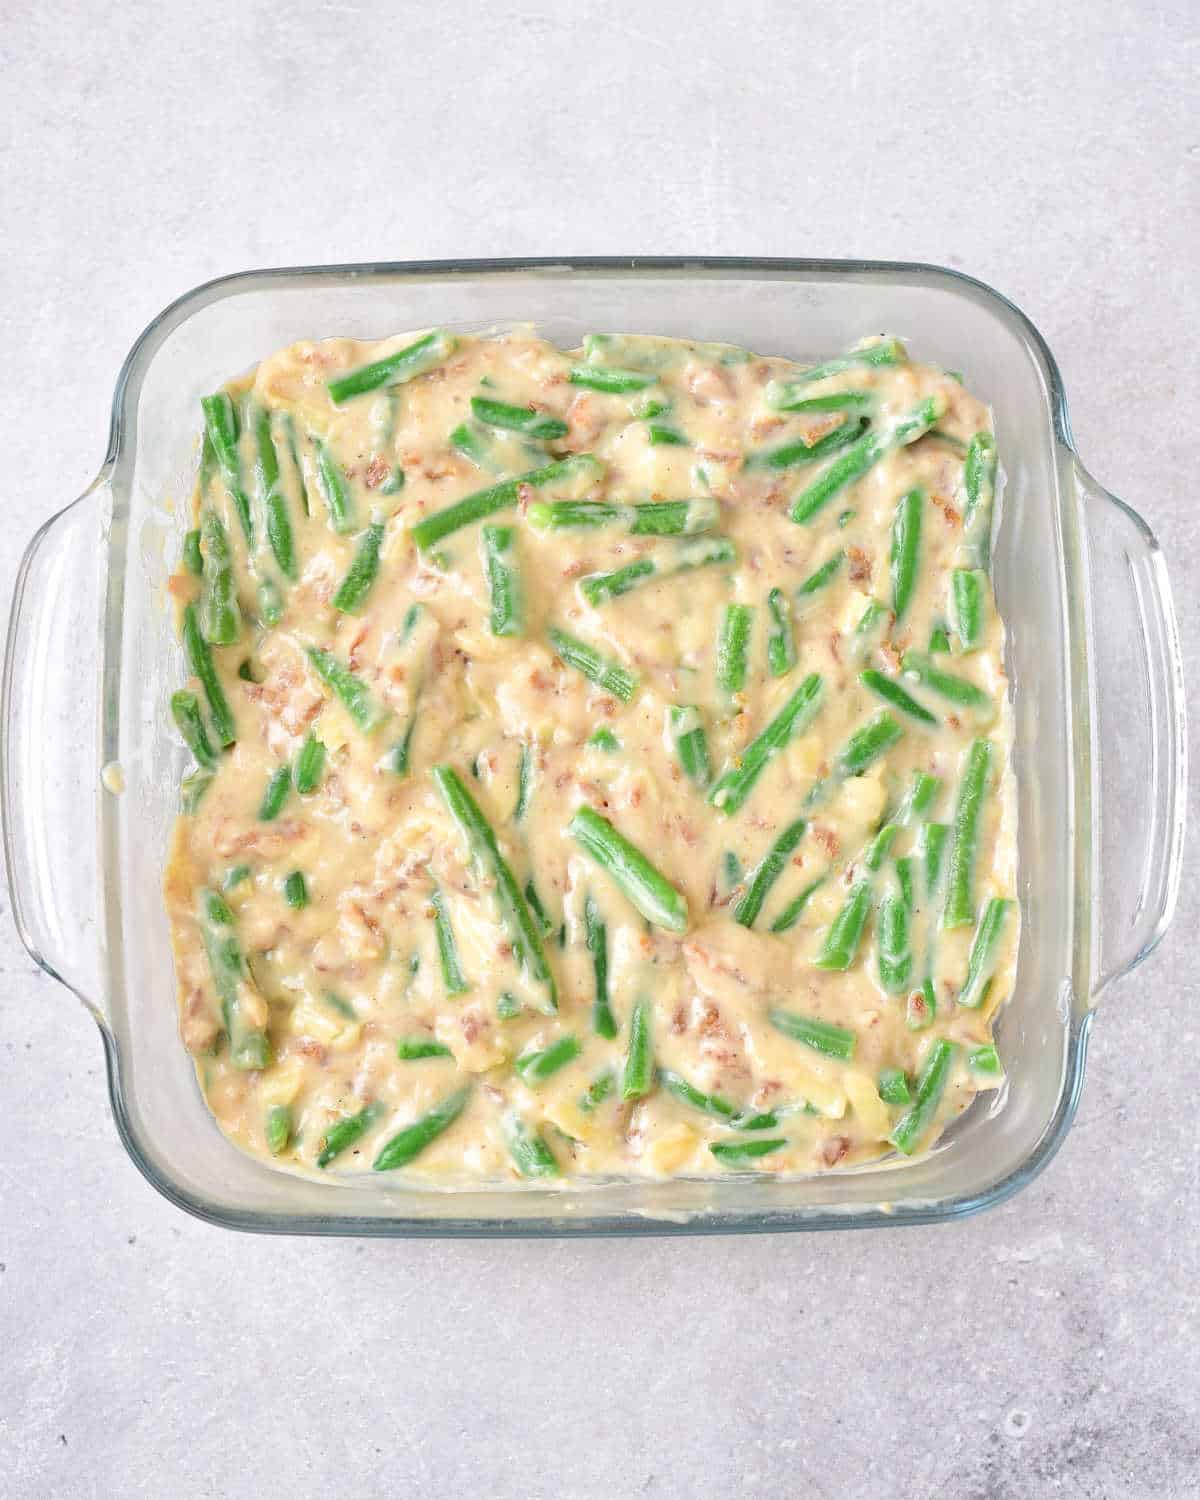 Glass dish with green bean casserole before baking on a grey surface.